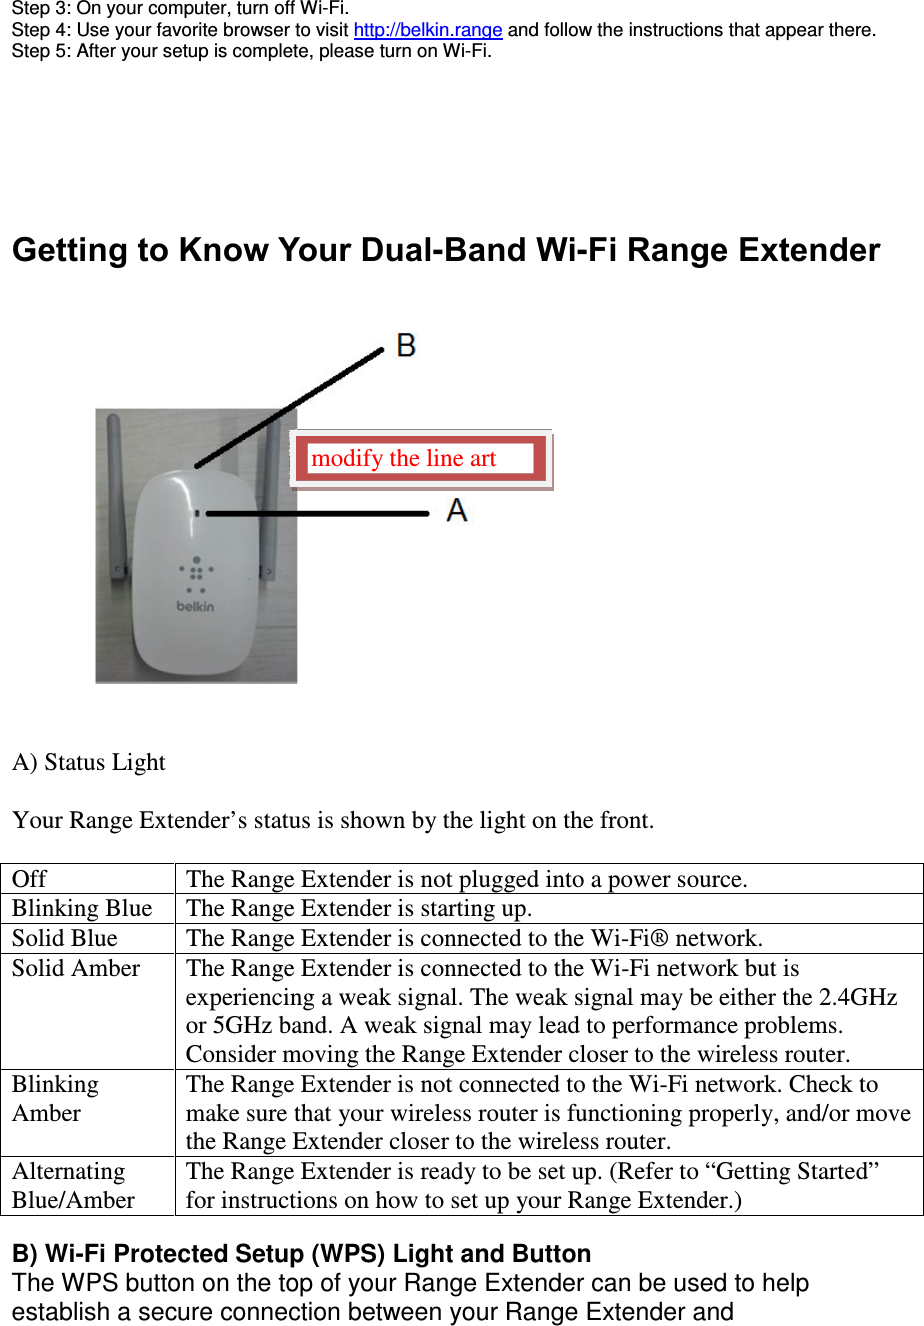   Step 3: On your computer, turn off Wi-Fi. Step 4: Use your favorite browser to visit http://belkin.range and follow the instructions that appear there. Step 5: After your setup is complete, please turn on Wi-Fi.      Getting to Know Your Dual-Band Wi-Fi Range Extender    A) Status Light  Your Range Extender’s status is shown by the light on the front.  Off  The Range Extender is not plugged into a power source. Blinking Blue  The Range Extender is starting up. Solid Blue  The Range Extender is connected to the Wi-Fi® network. Solid Amber  The Range Extender is connected to the Wi-Fi network but is experiencing a weak signal. The weak signal may be either the 2.4GHz or 5GHz band. A weak signal may lead to performance problems. Consider moving the Range Extender closer to the wireless router. Blinking Amber The Range Extender is not connected to the Wi-Fi network. Check to make sure that your wireless router is functioning properly, and/or move the Range Extender closer to the wireless router.   Alternating Blue/Amber The Range Extender is ready to be set up. (Refer to “Getting Started” for instructions on how to set up your Range Extender.)  B) Wi-Fi Protected Setup (WPS) Light and Button The WPS button on the top of your Range Extender can be used to help establish a secure connection between your Range Extender and modify the line art  